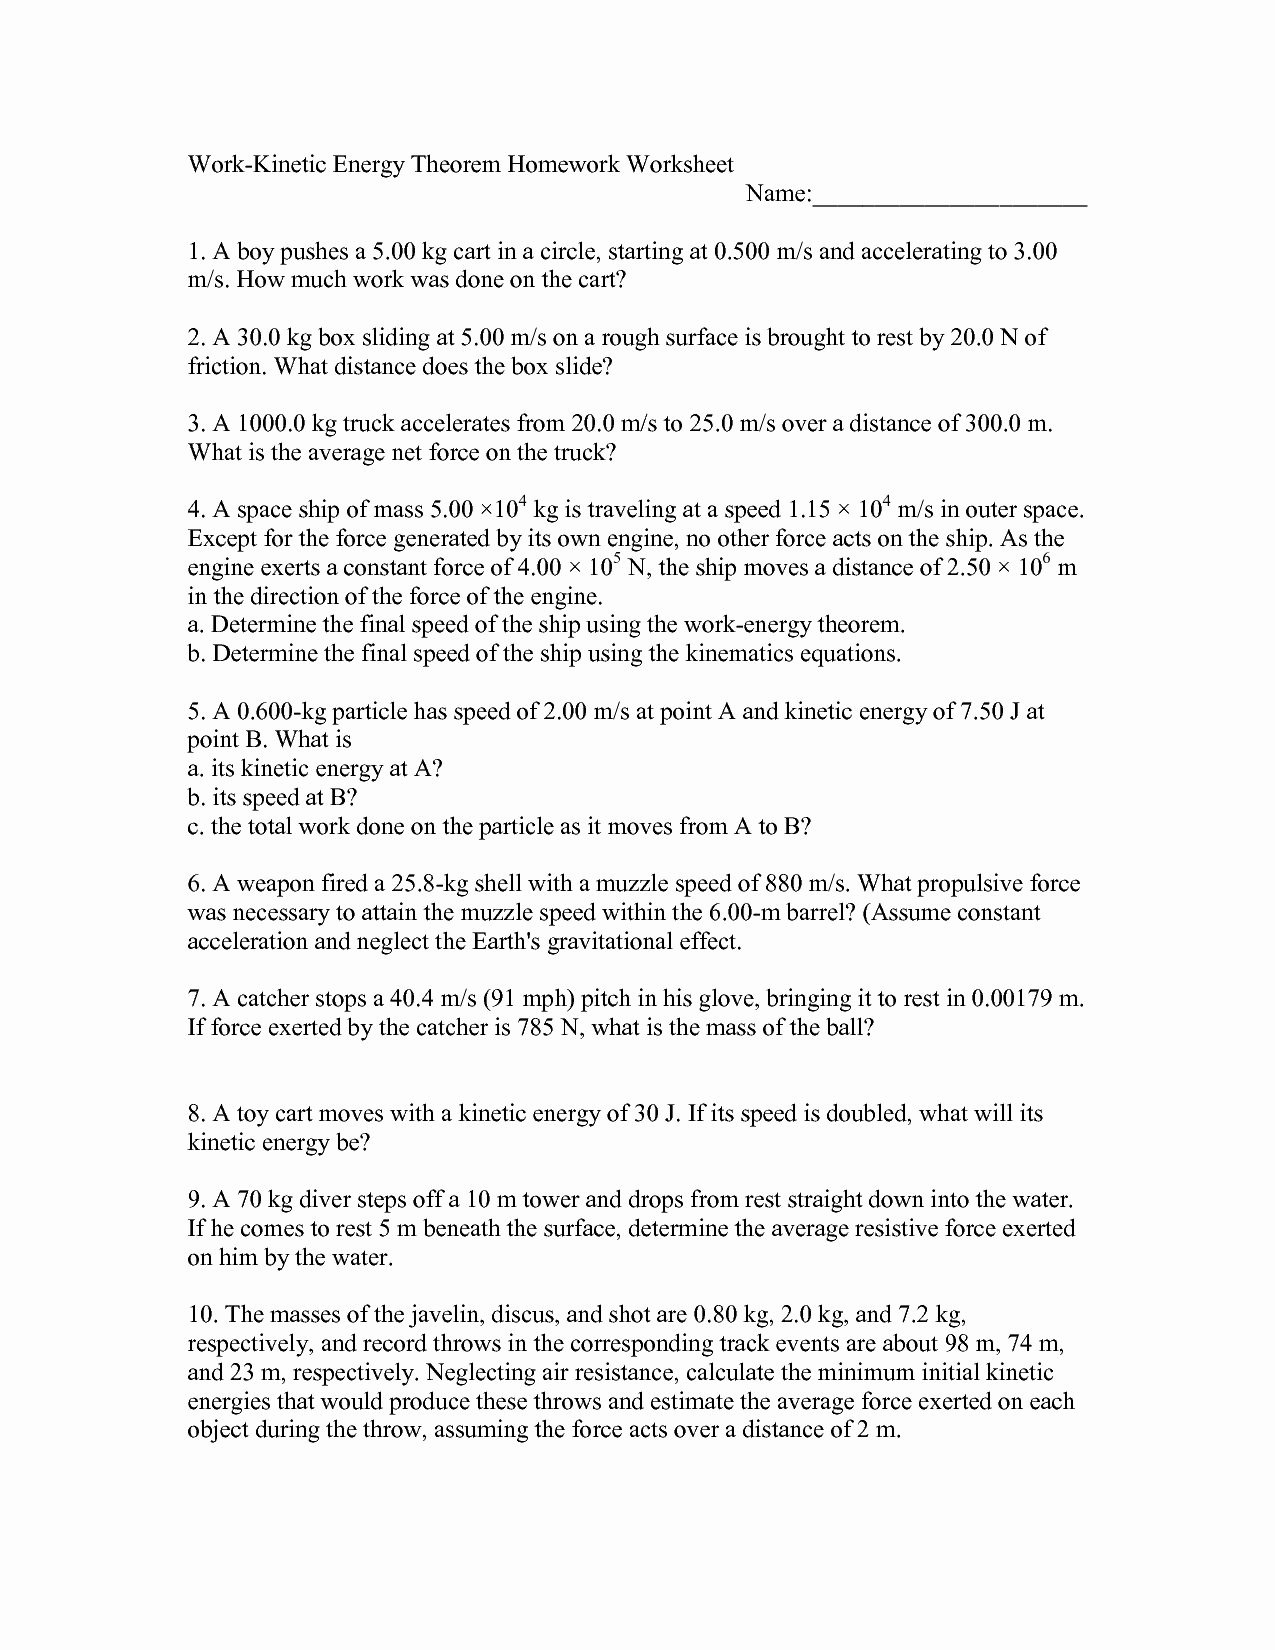 Work Power Energy Worksheet Awesome 7 Best Of Work and Power Worksheet Answers Work